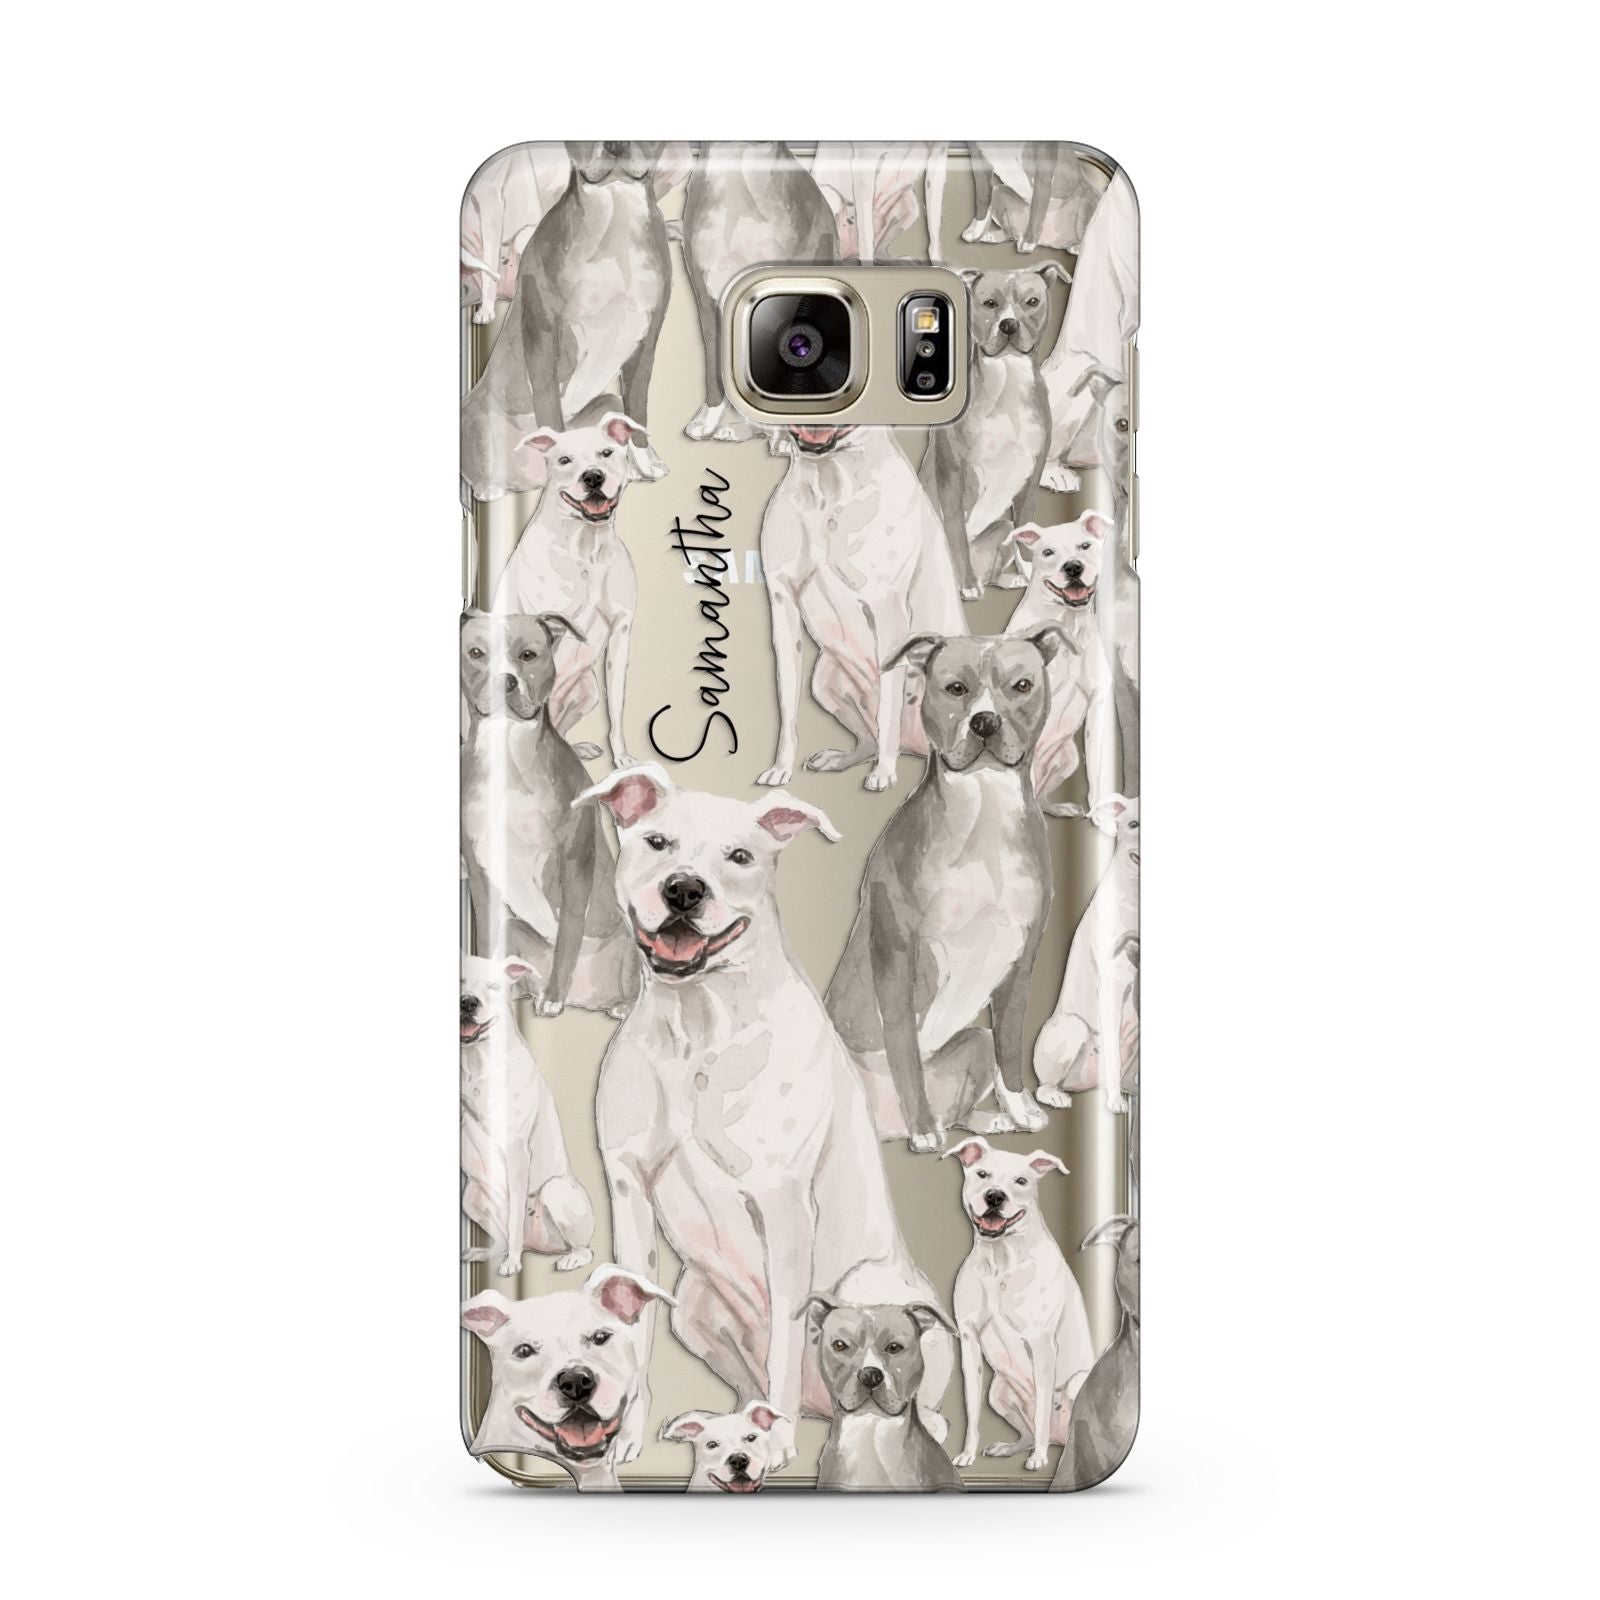 Personalised Staffordshire Dog Samsung Galaxy Note 5 Case